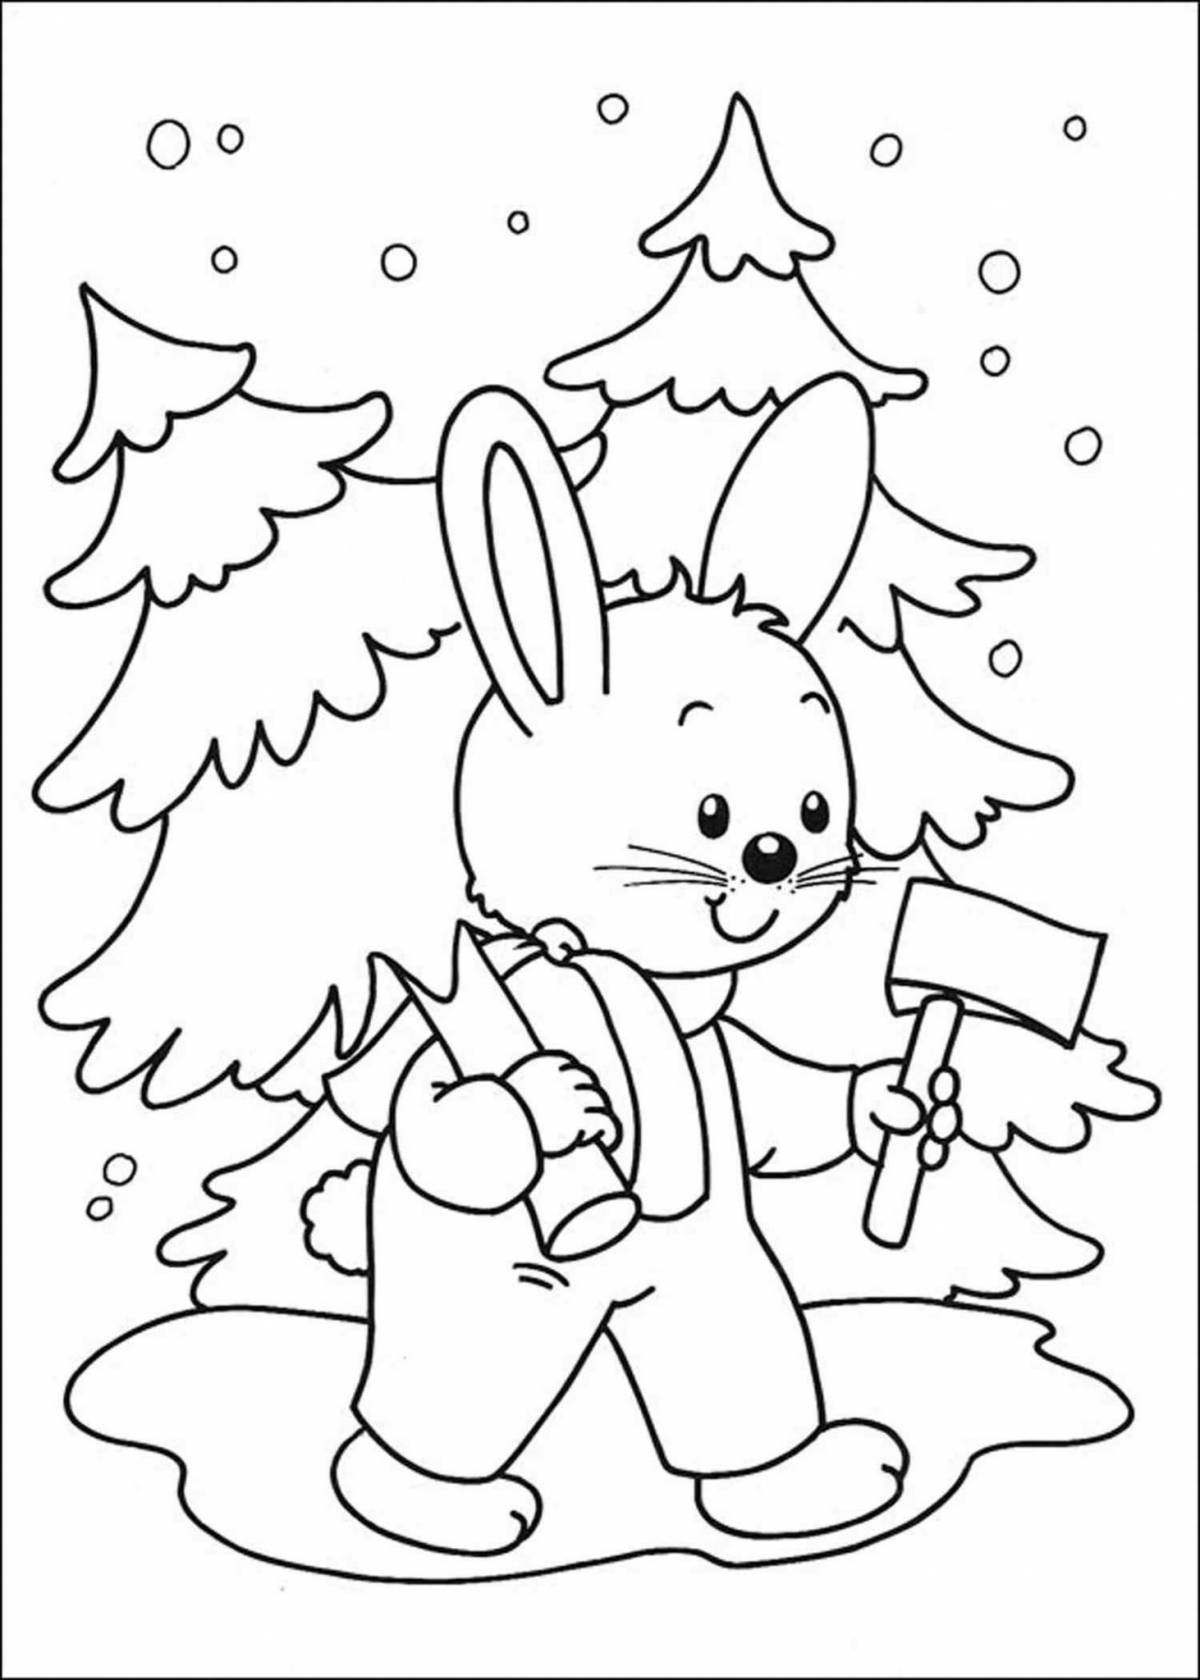 Coloring book New Year's Bunny in a colorful package